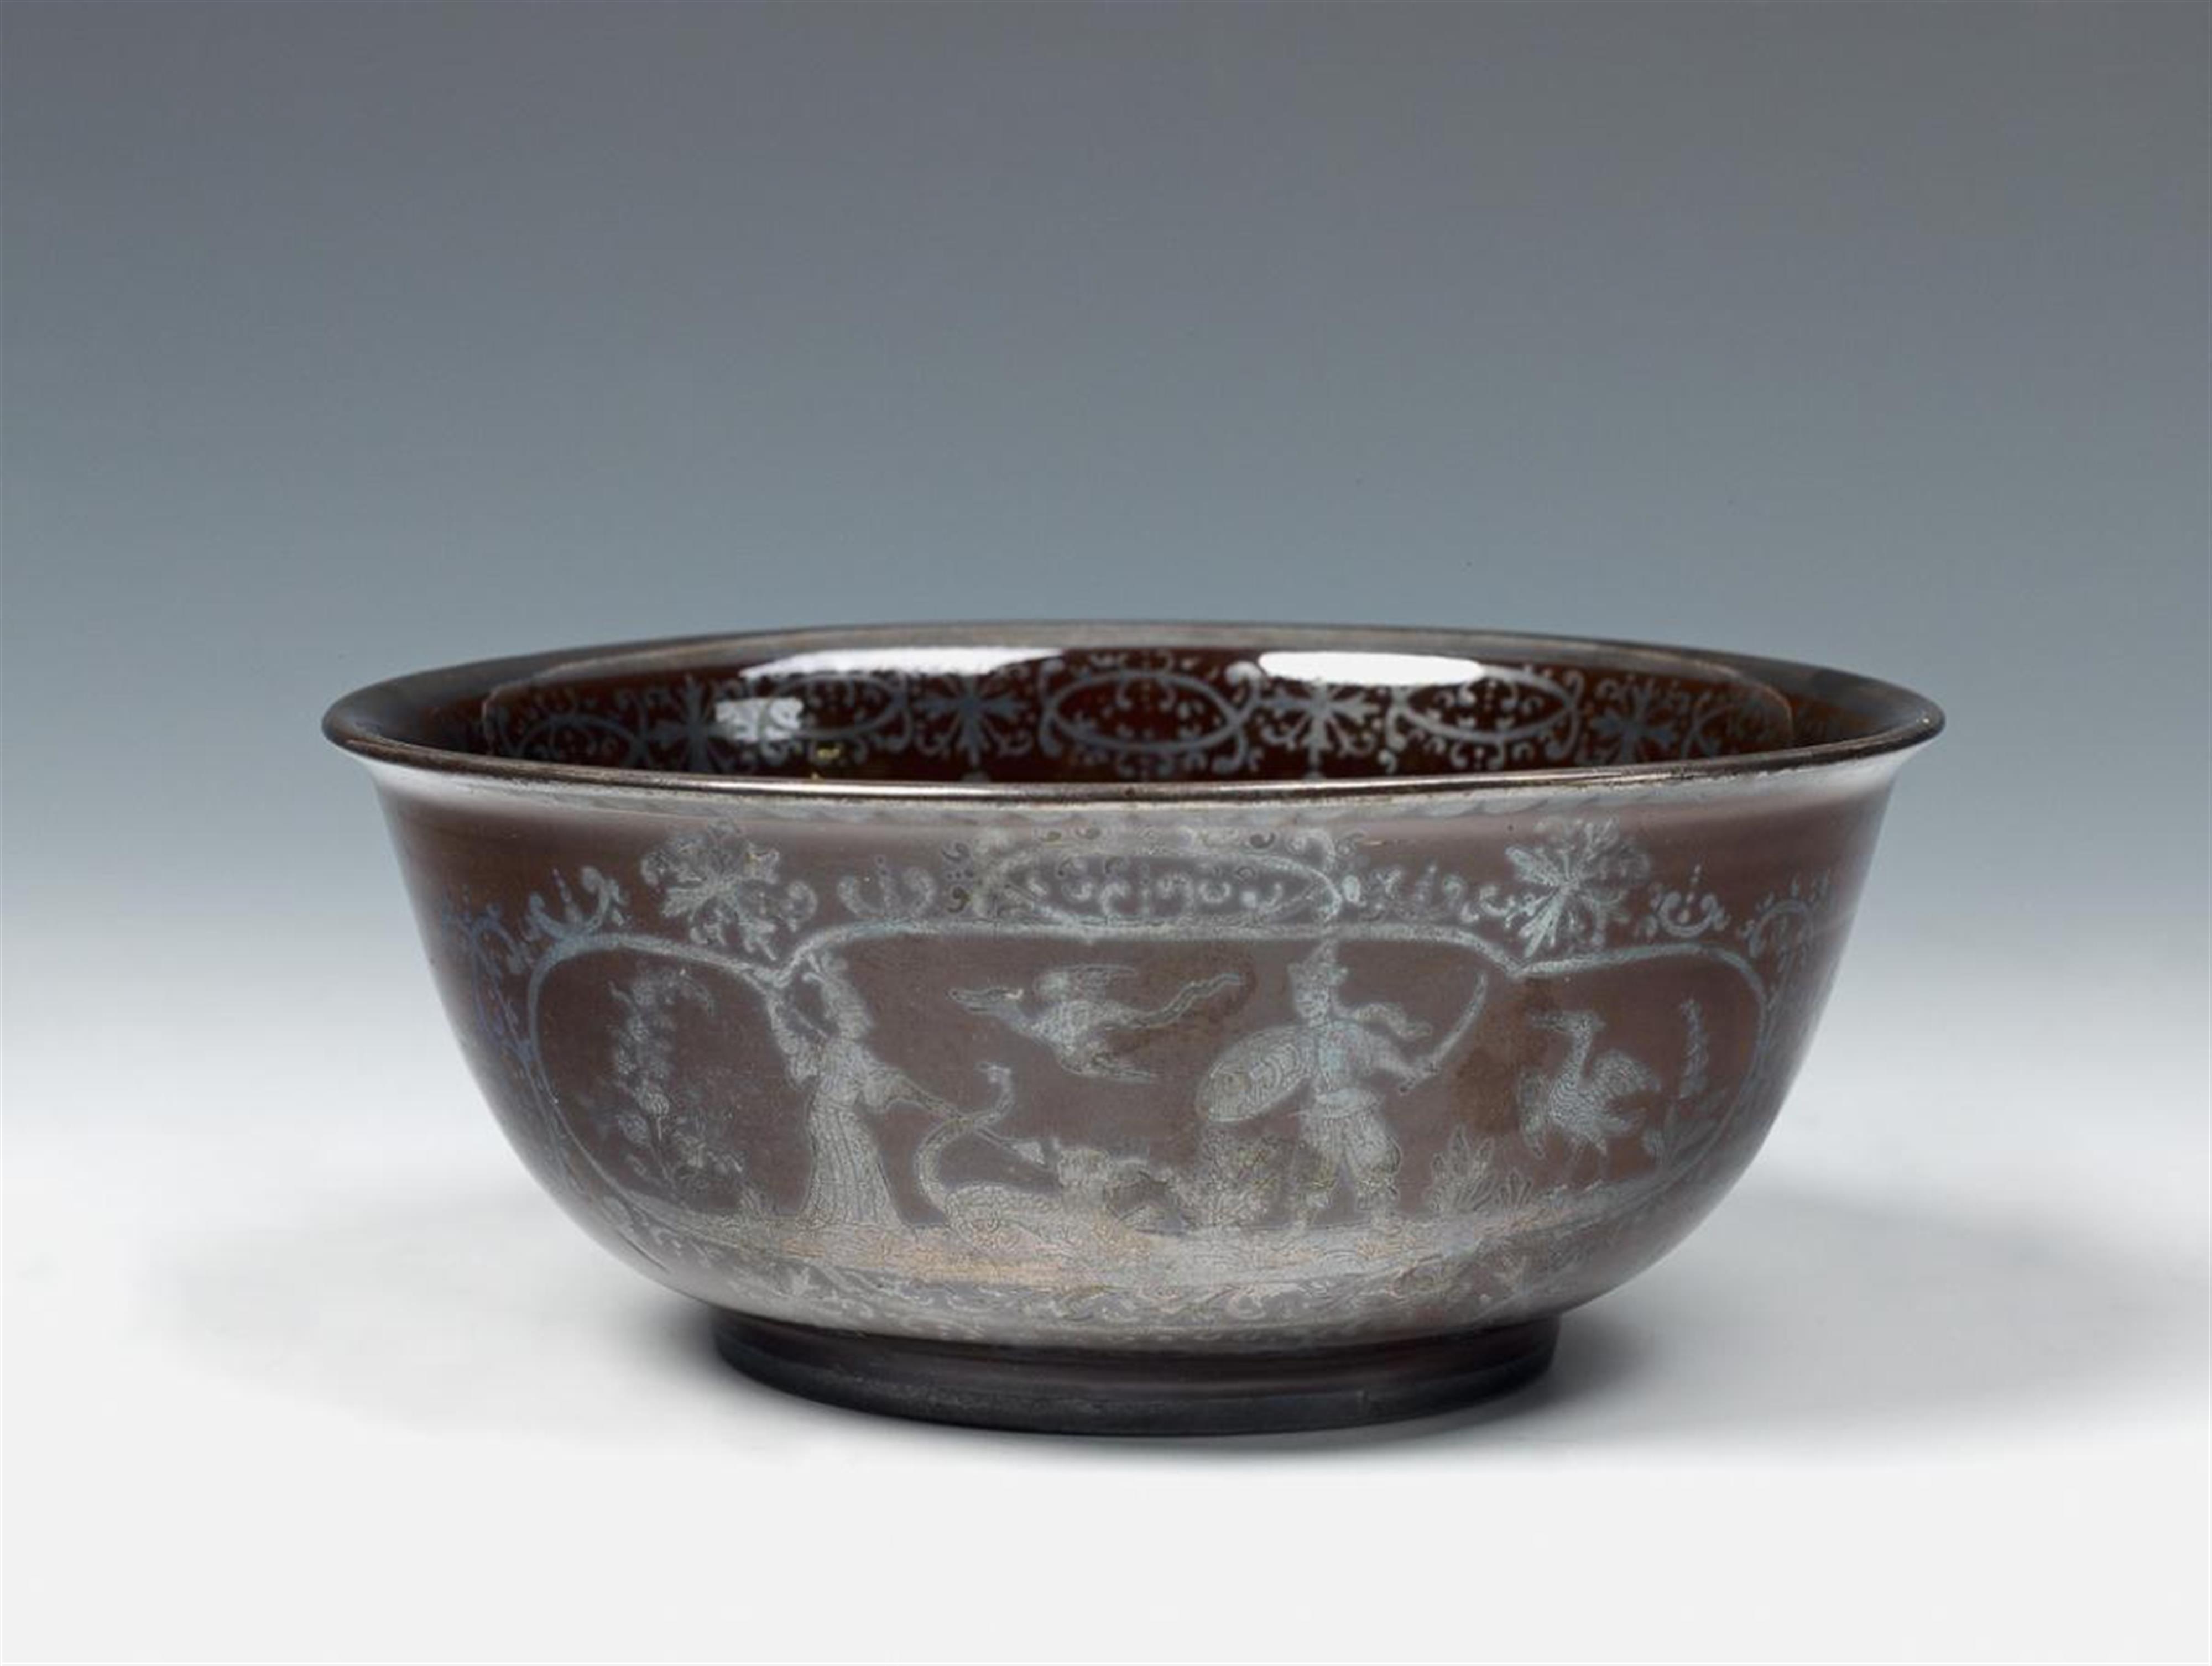 A dark brown glazed Bayreuth earthenware bowl with oxidised silver hunting scene decor. Bayreuther Kumme - image-1